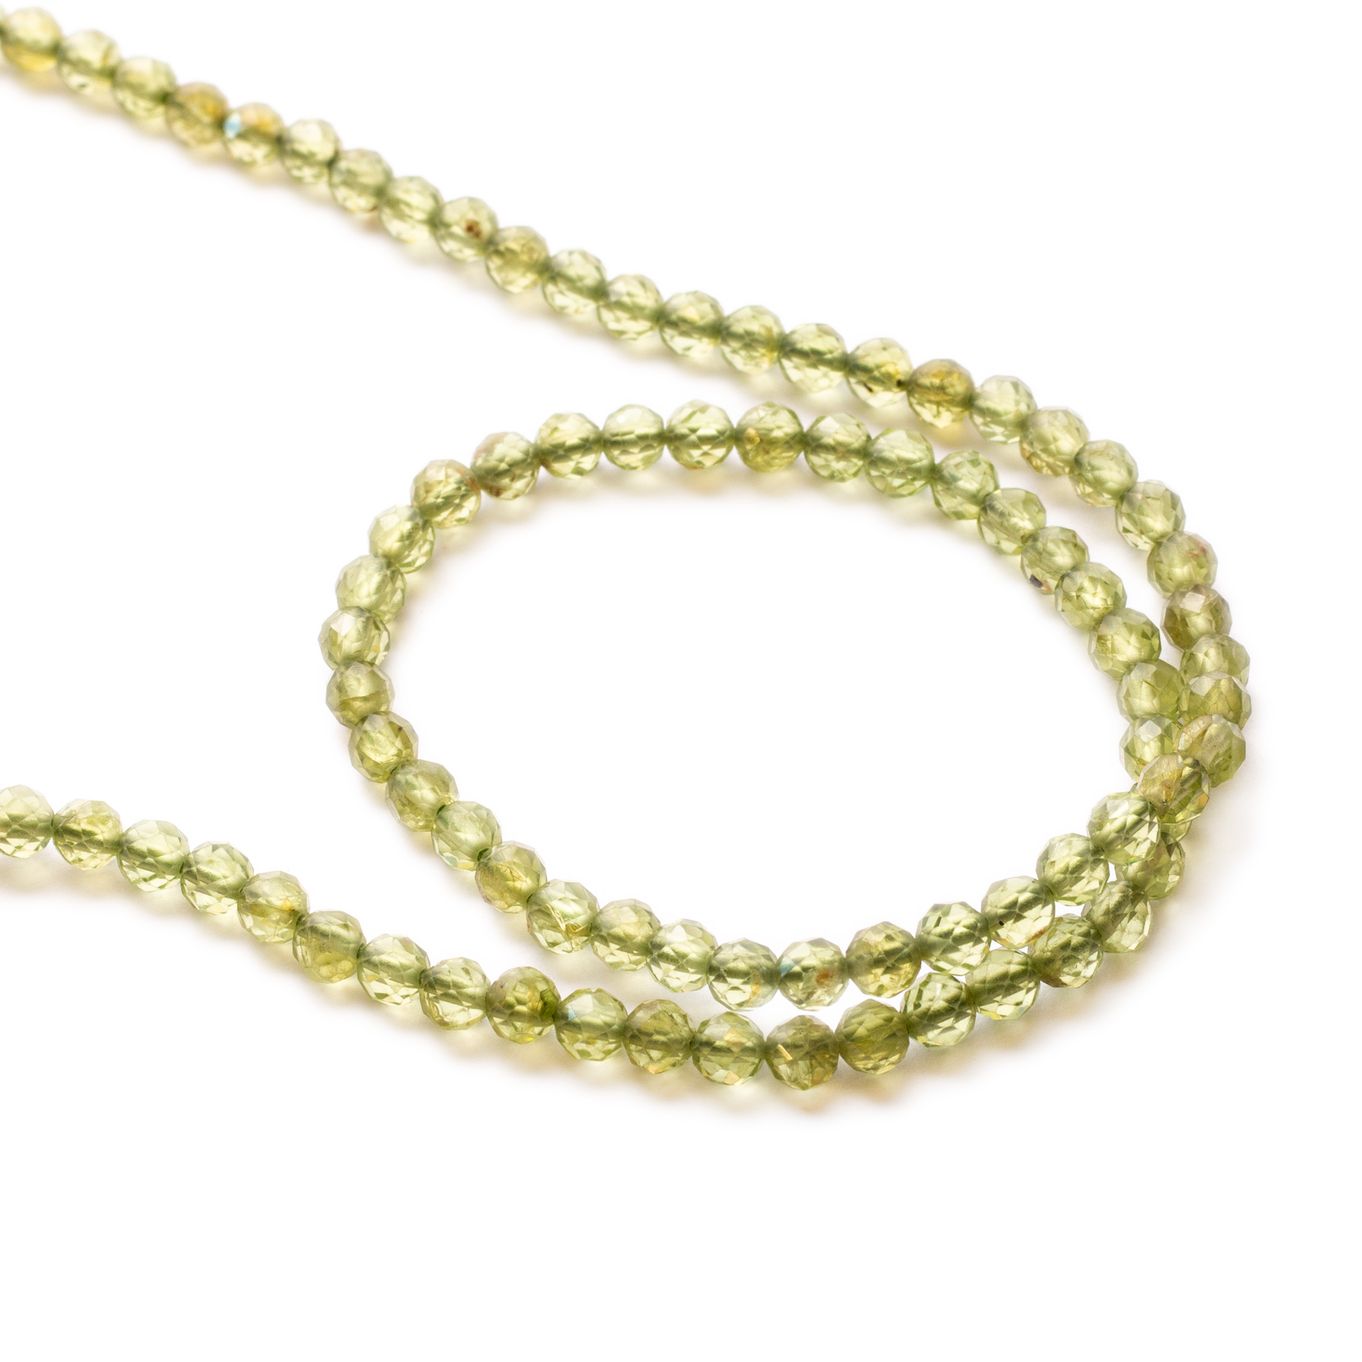 Peridot Faceted Round Beads - Approx 3.5mm